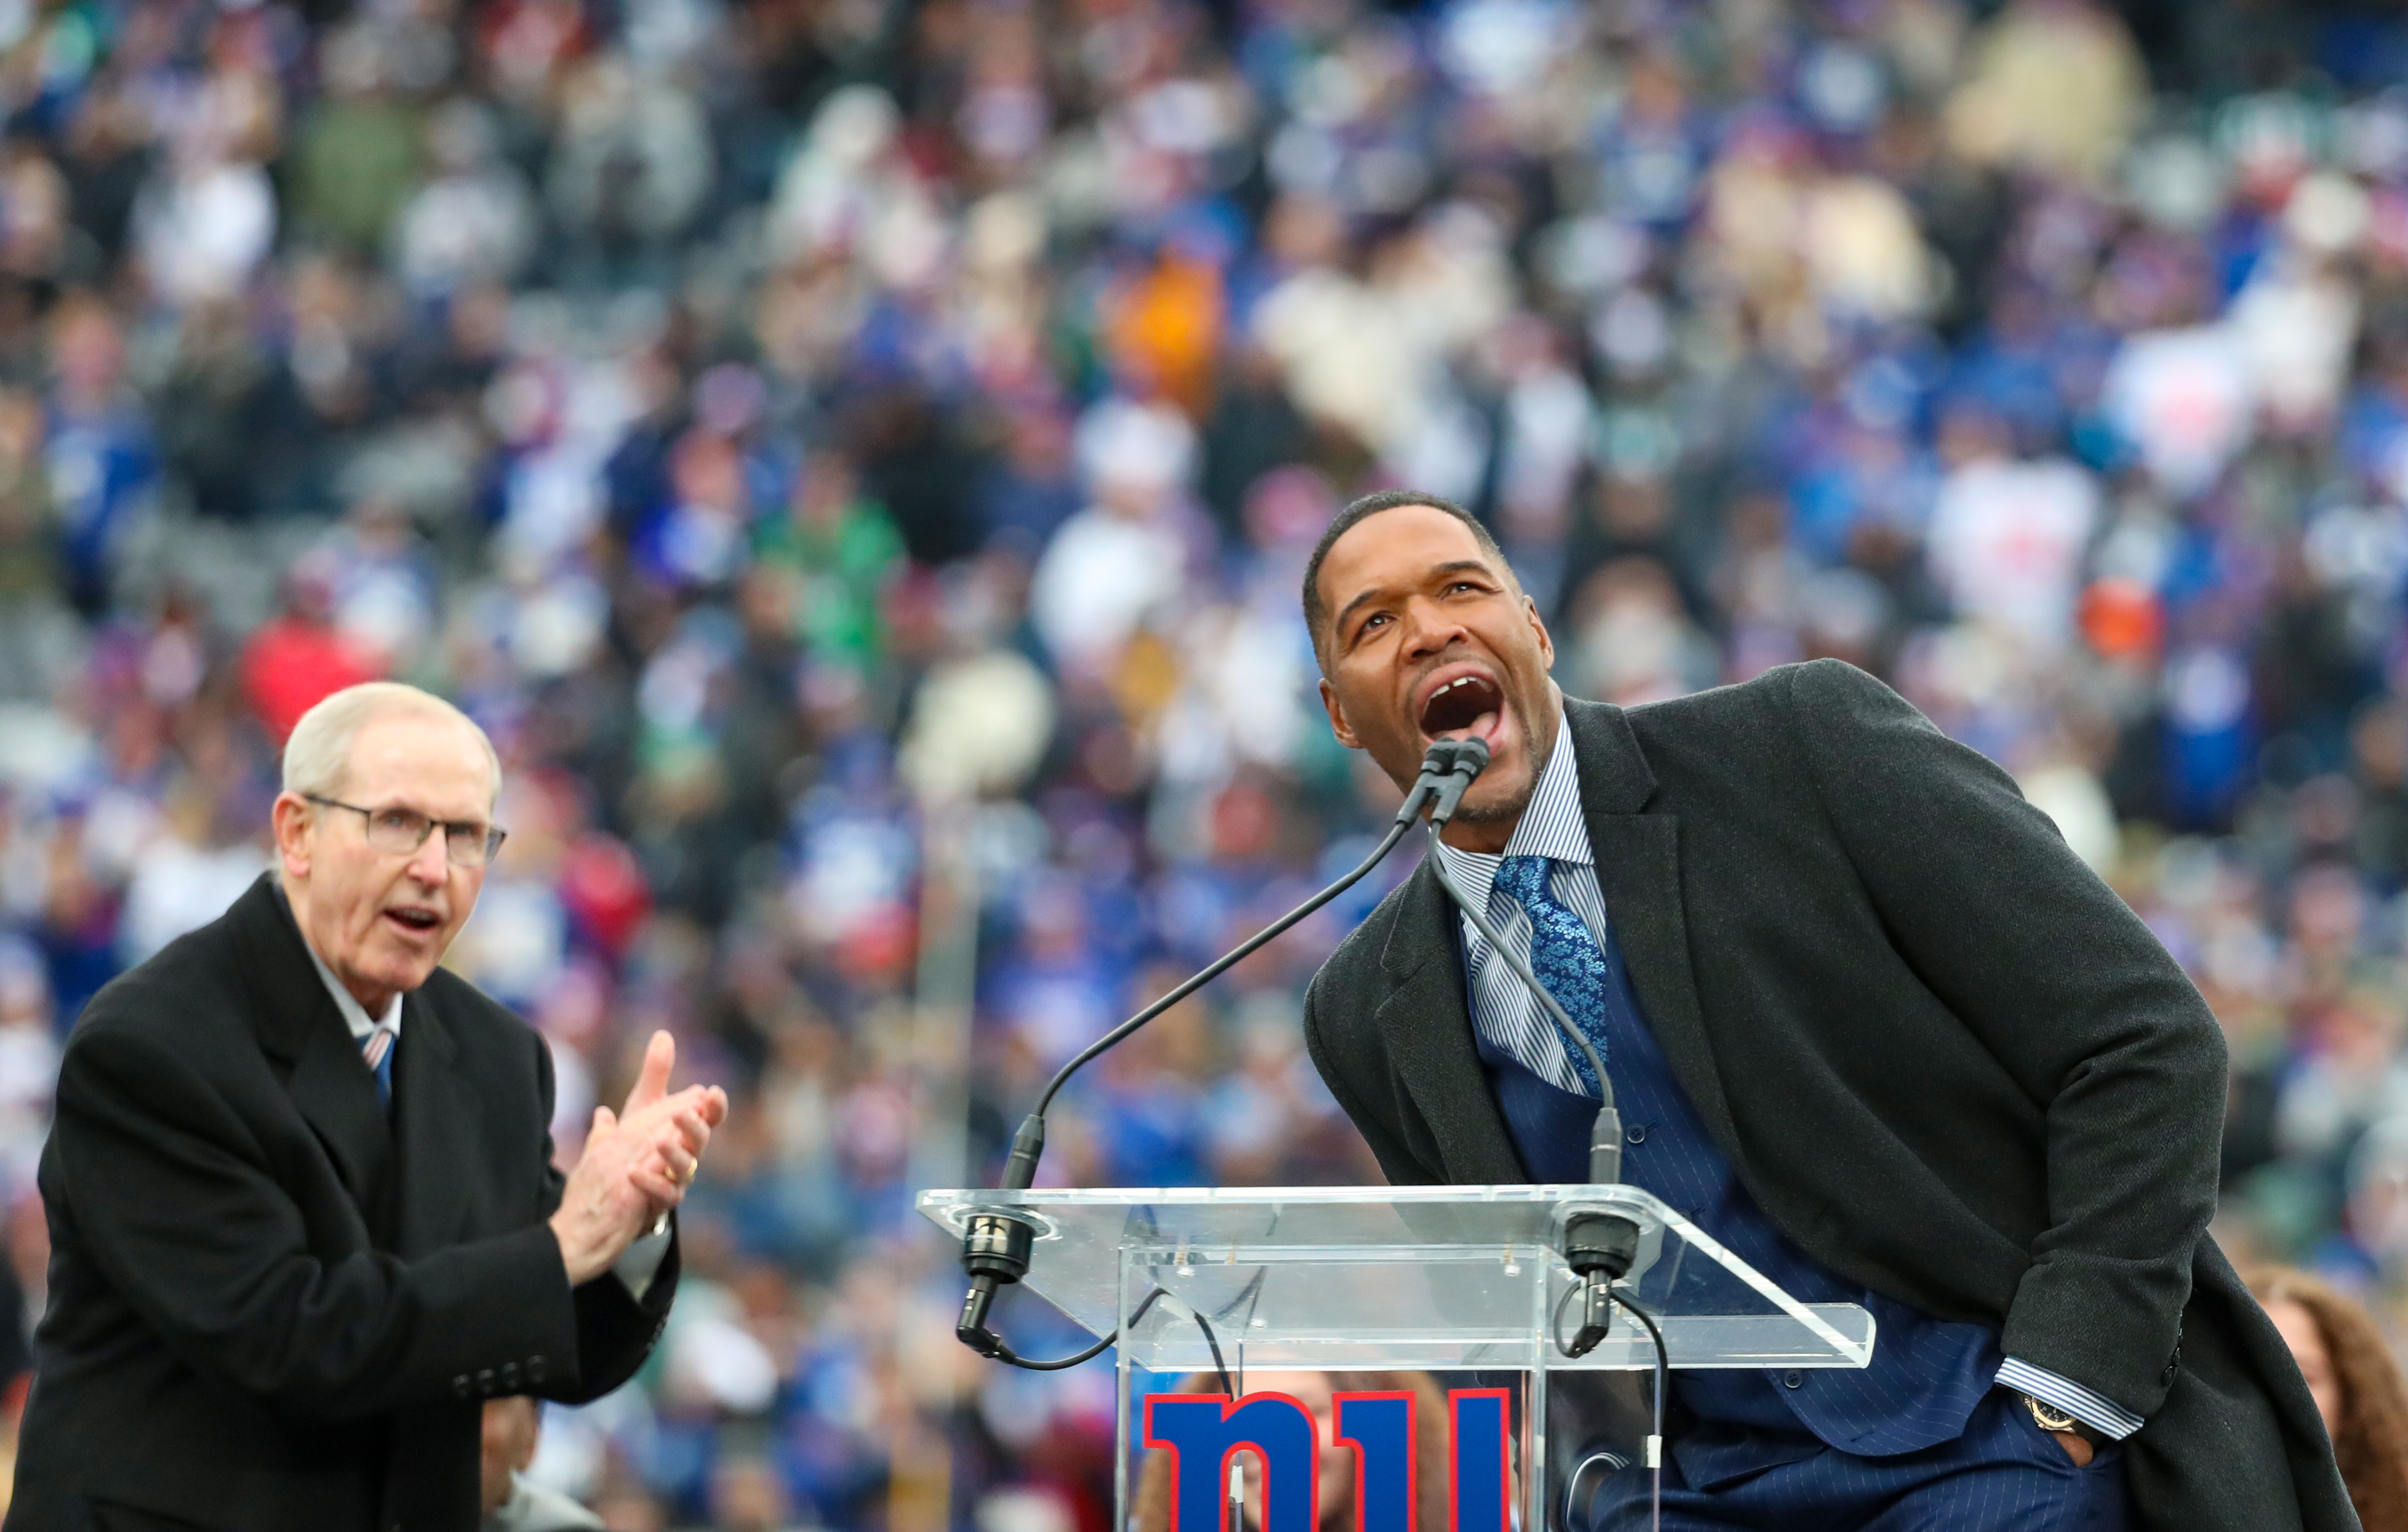 Former New York Giants head coach Tom Coughlin and Michael Strahan during a halftime ceremony to retire Strahan’s No. 92 jersey on Sunday, Nov. 28, 2021 at MetLife Stadium.